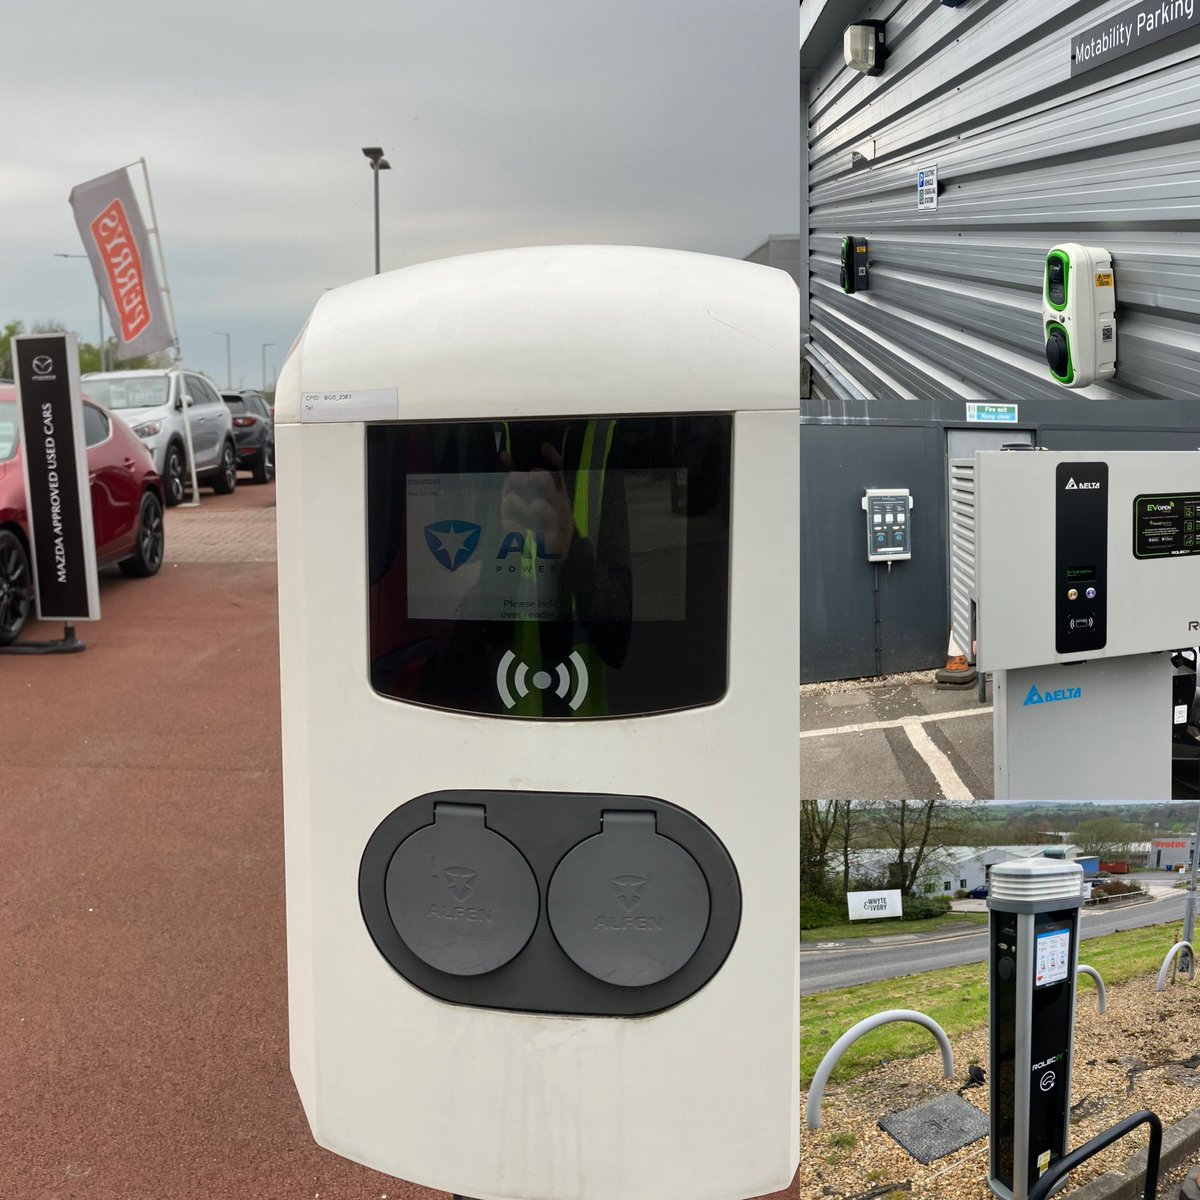 Final day of @perrysmotors northern integration trip

430 miles travelled
12 different locations
42 @RolecEV units
12 @AlfenNV units
8 @DeltaEMEA units
AC & DC chargers

1 fully integrated back office.

For more information, please contact sales@power-portal.co.uk